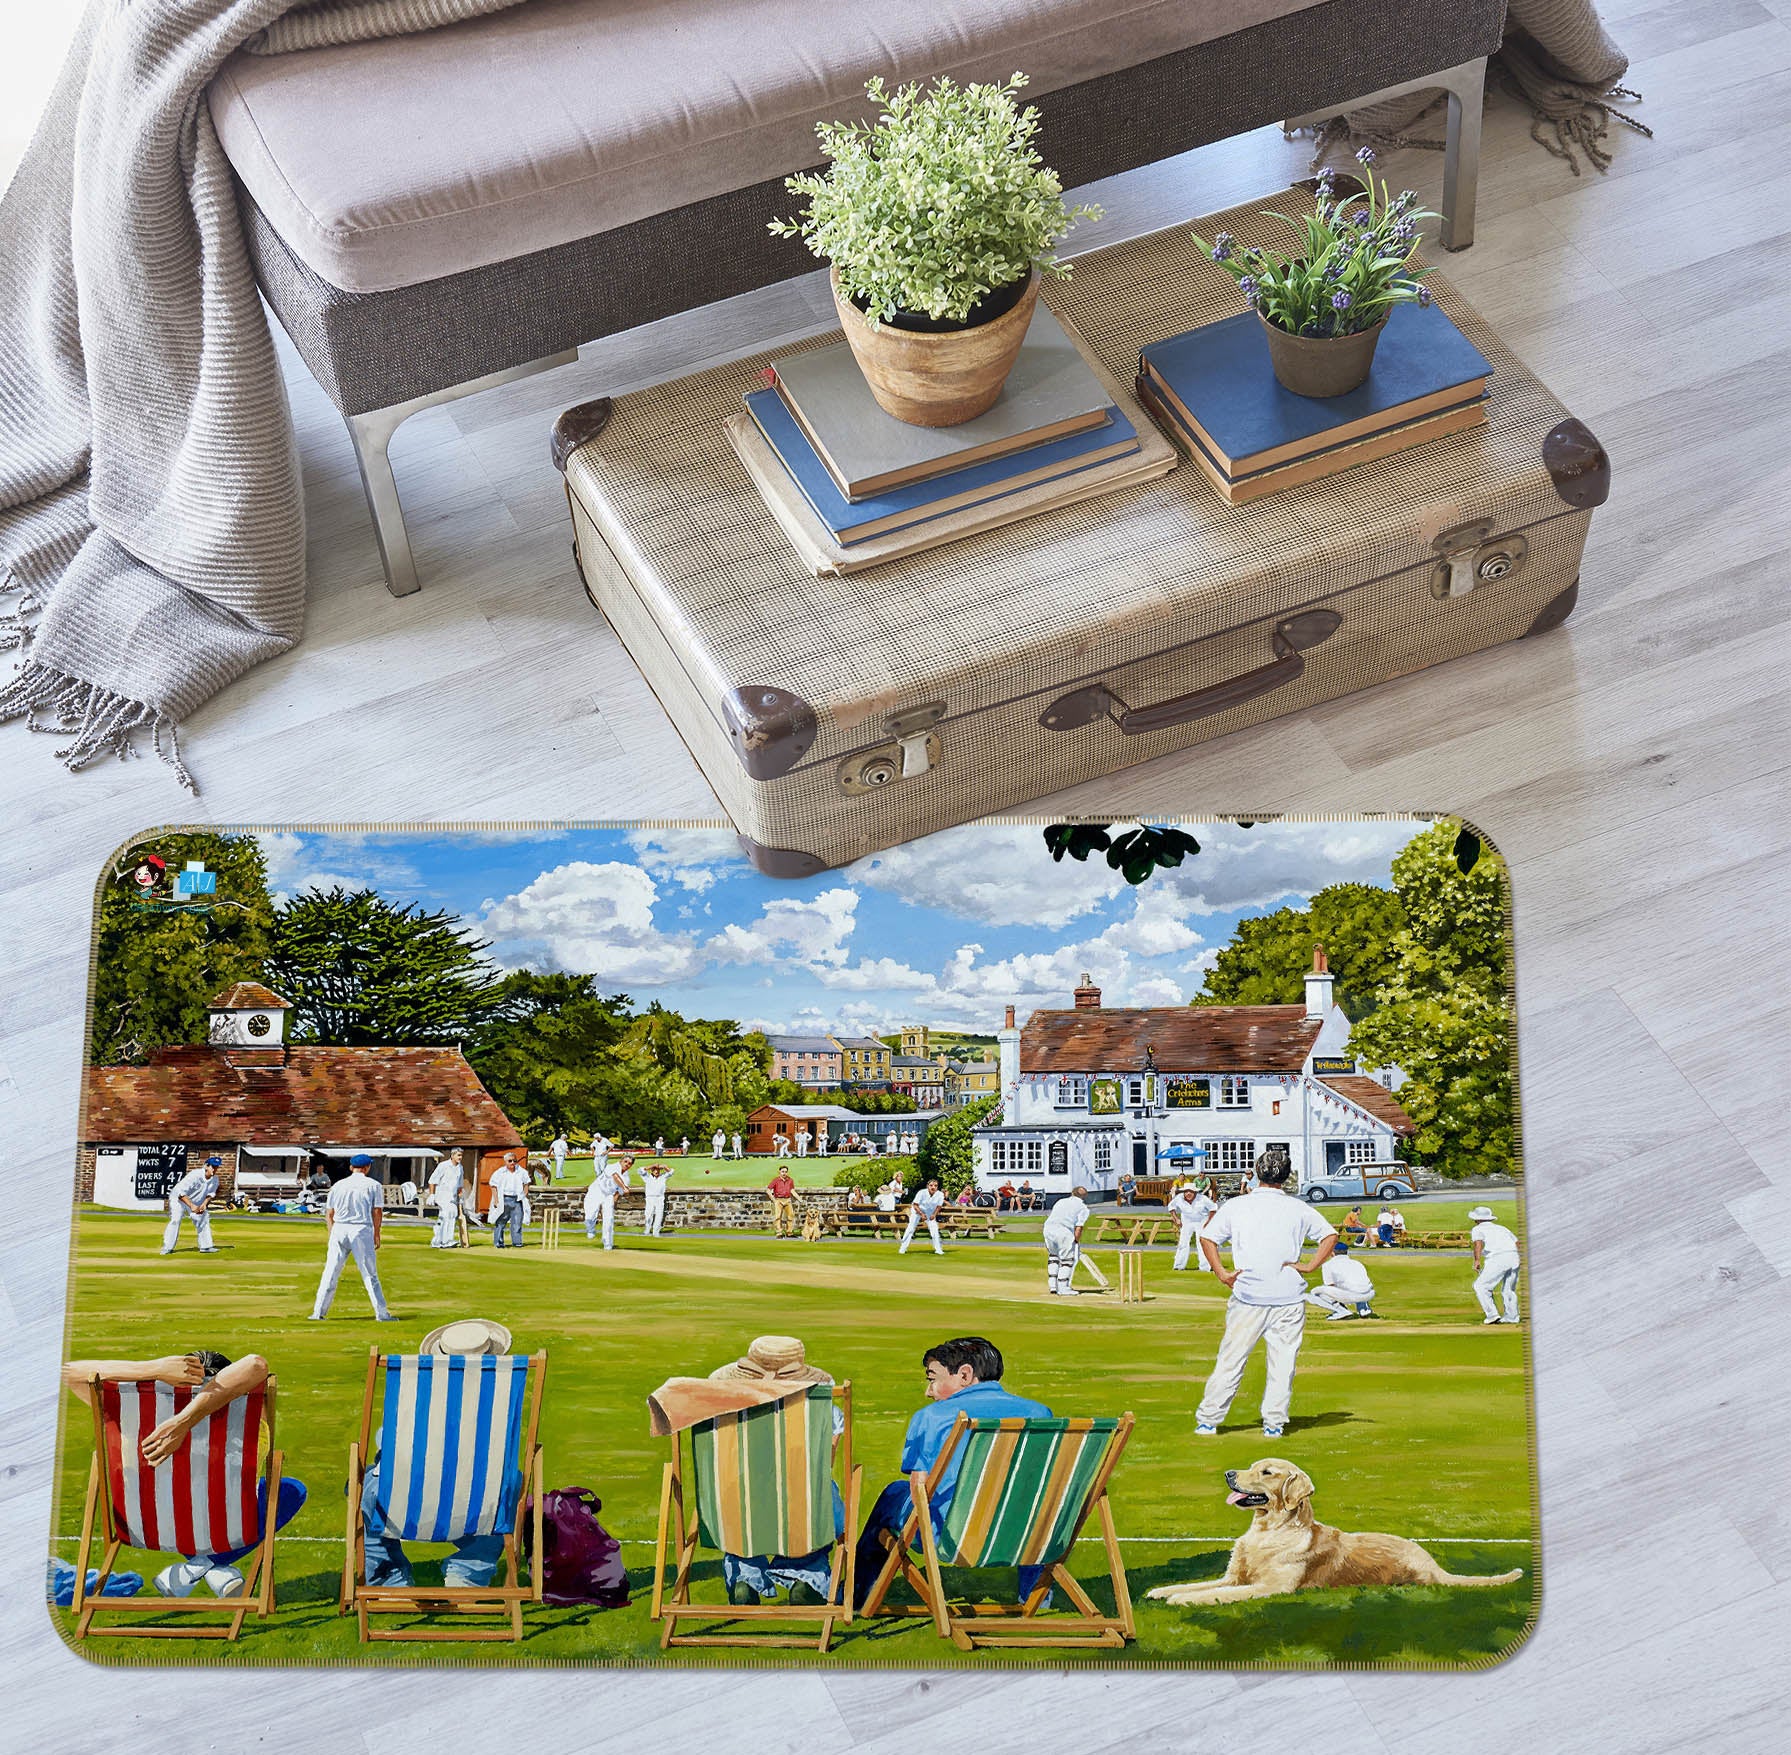 3D Lawn People Play 8921 Trevor Mitchell Rug Non Slip Rug Mat